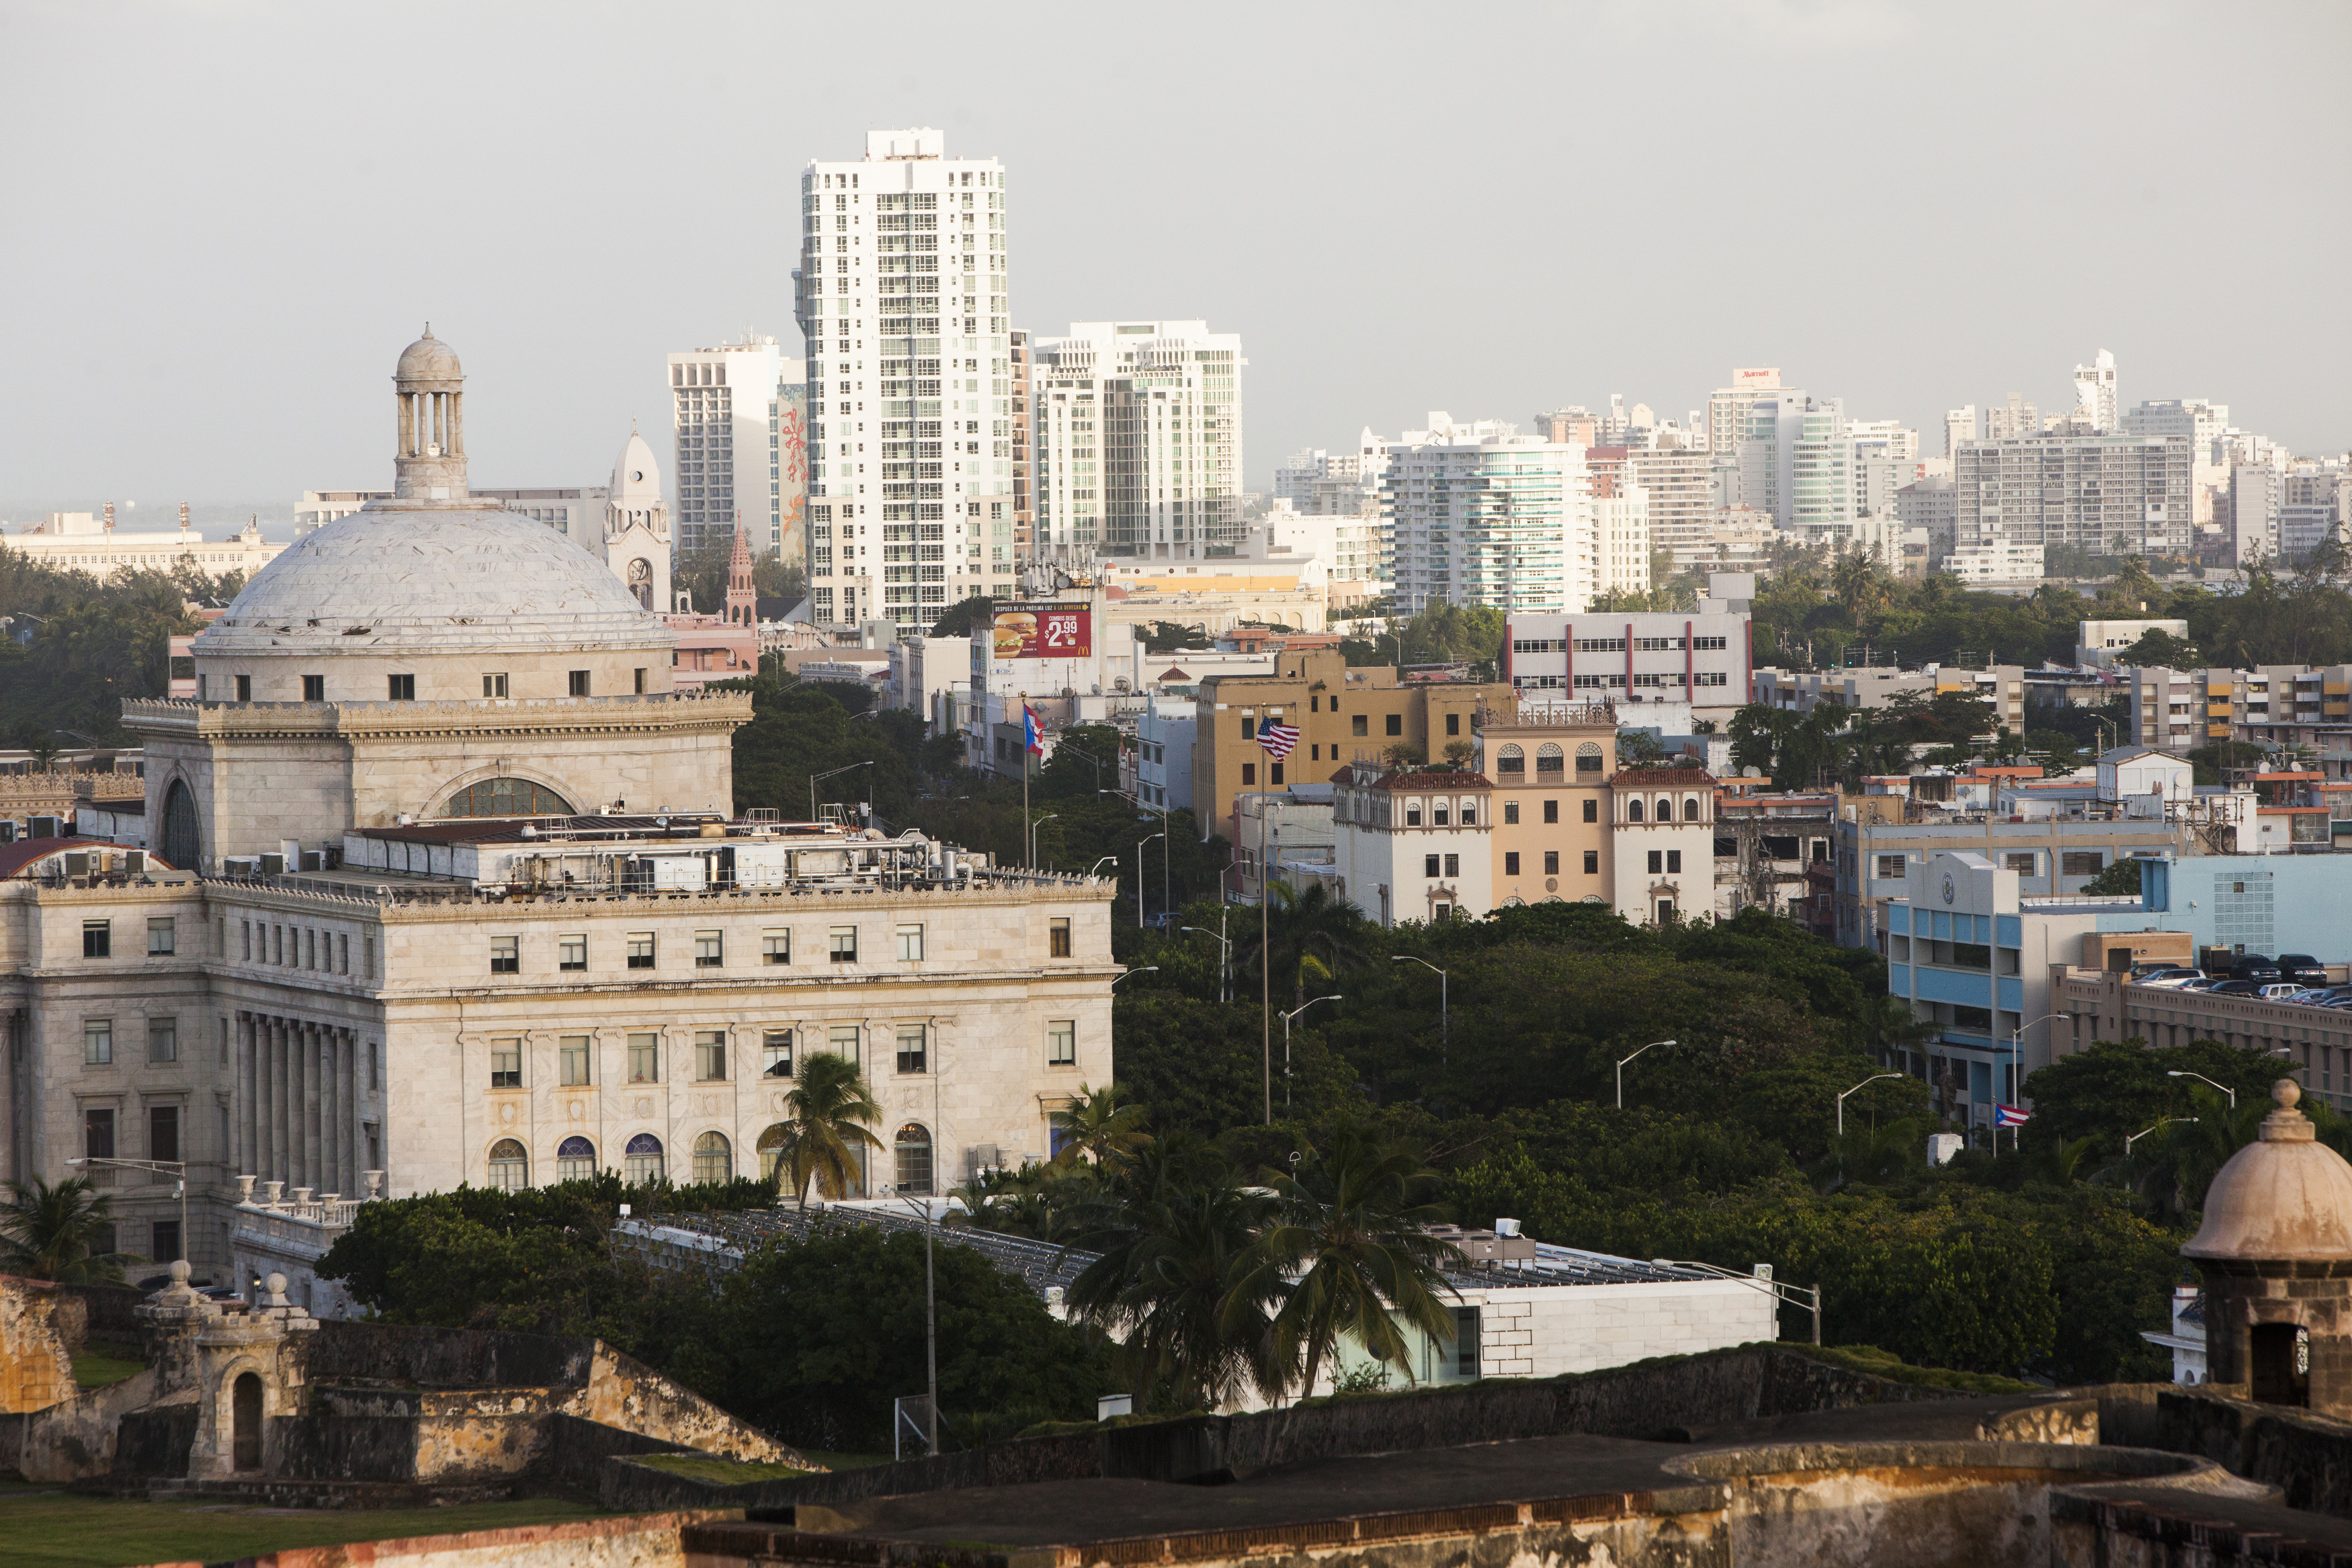 Old San Juan, the center for Puerto Rican tourism, on November 12, 2013. (Christopher Gregory—Getty Images)